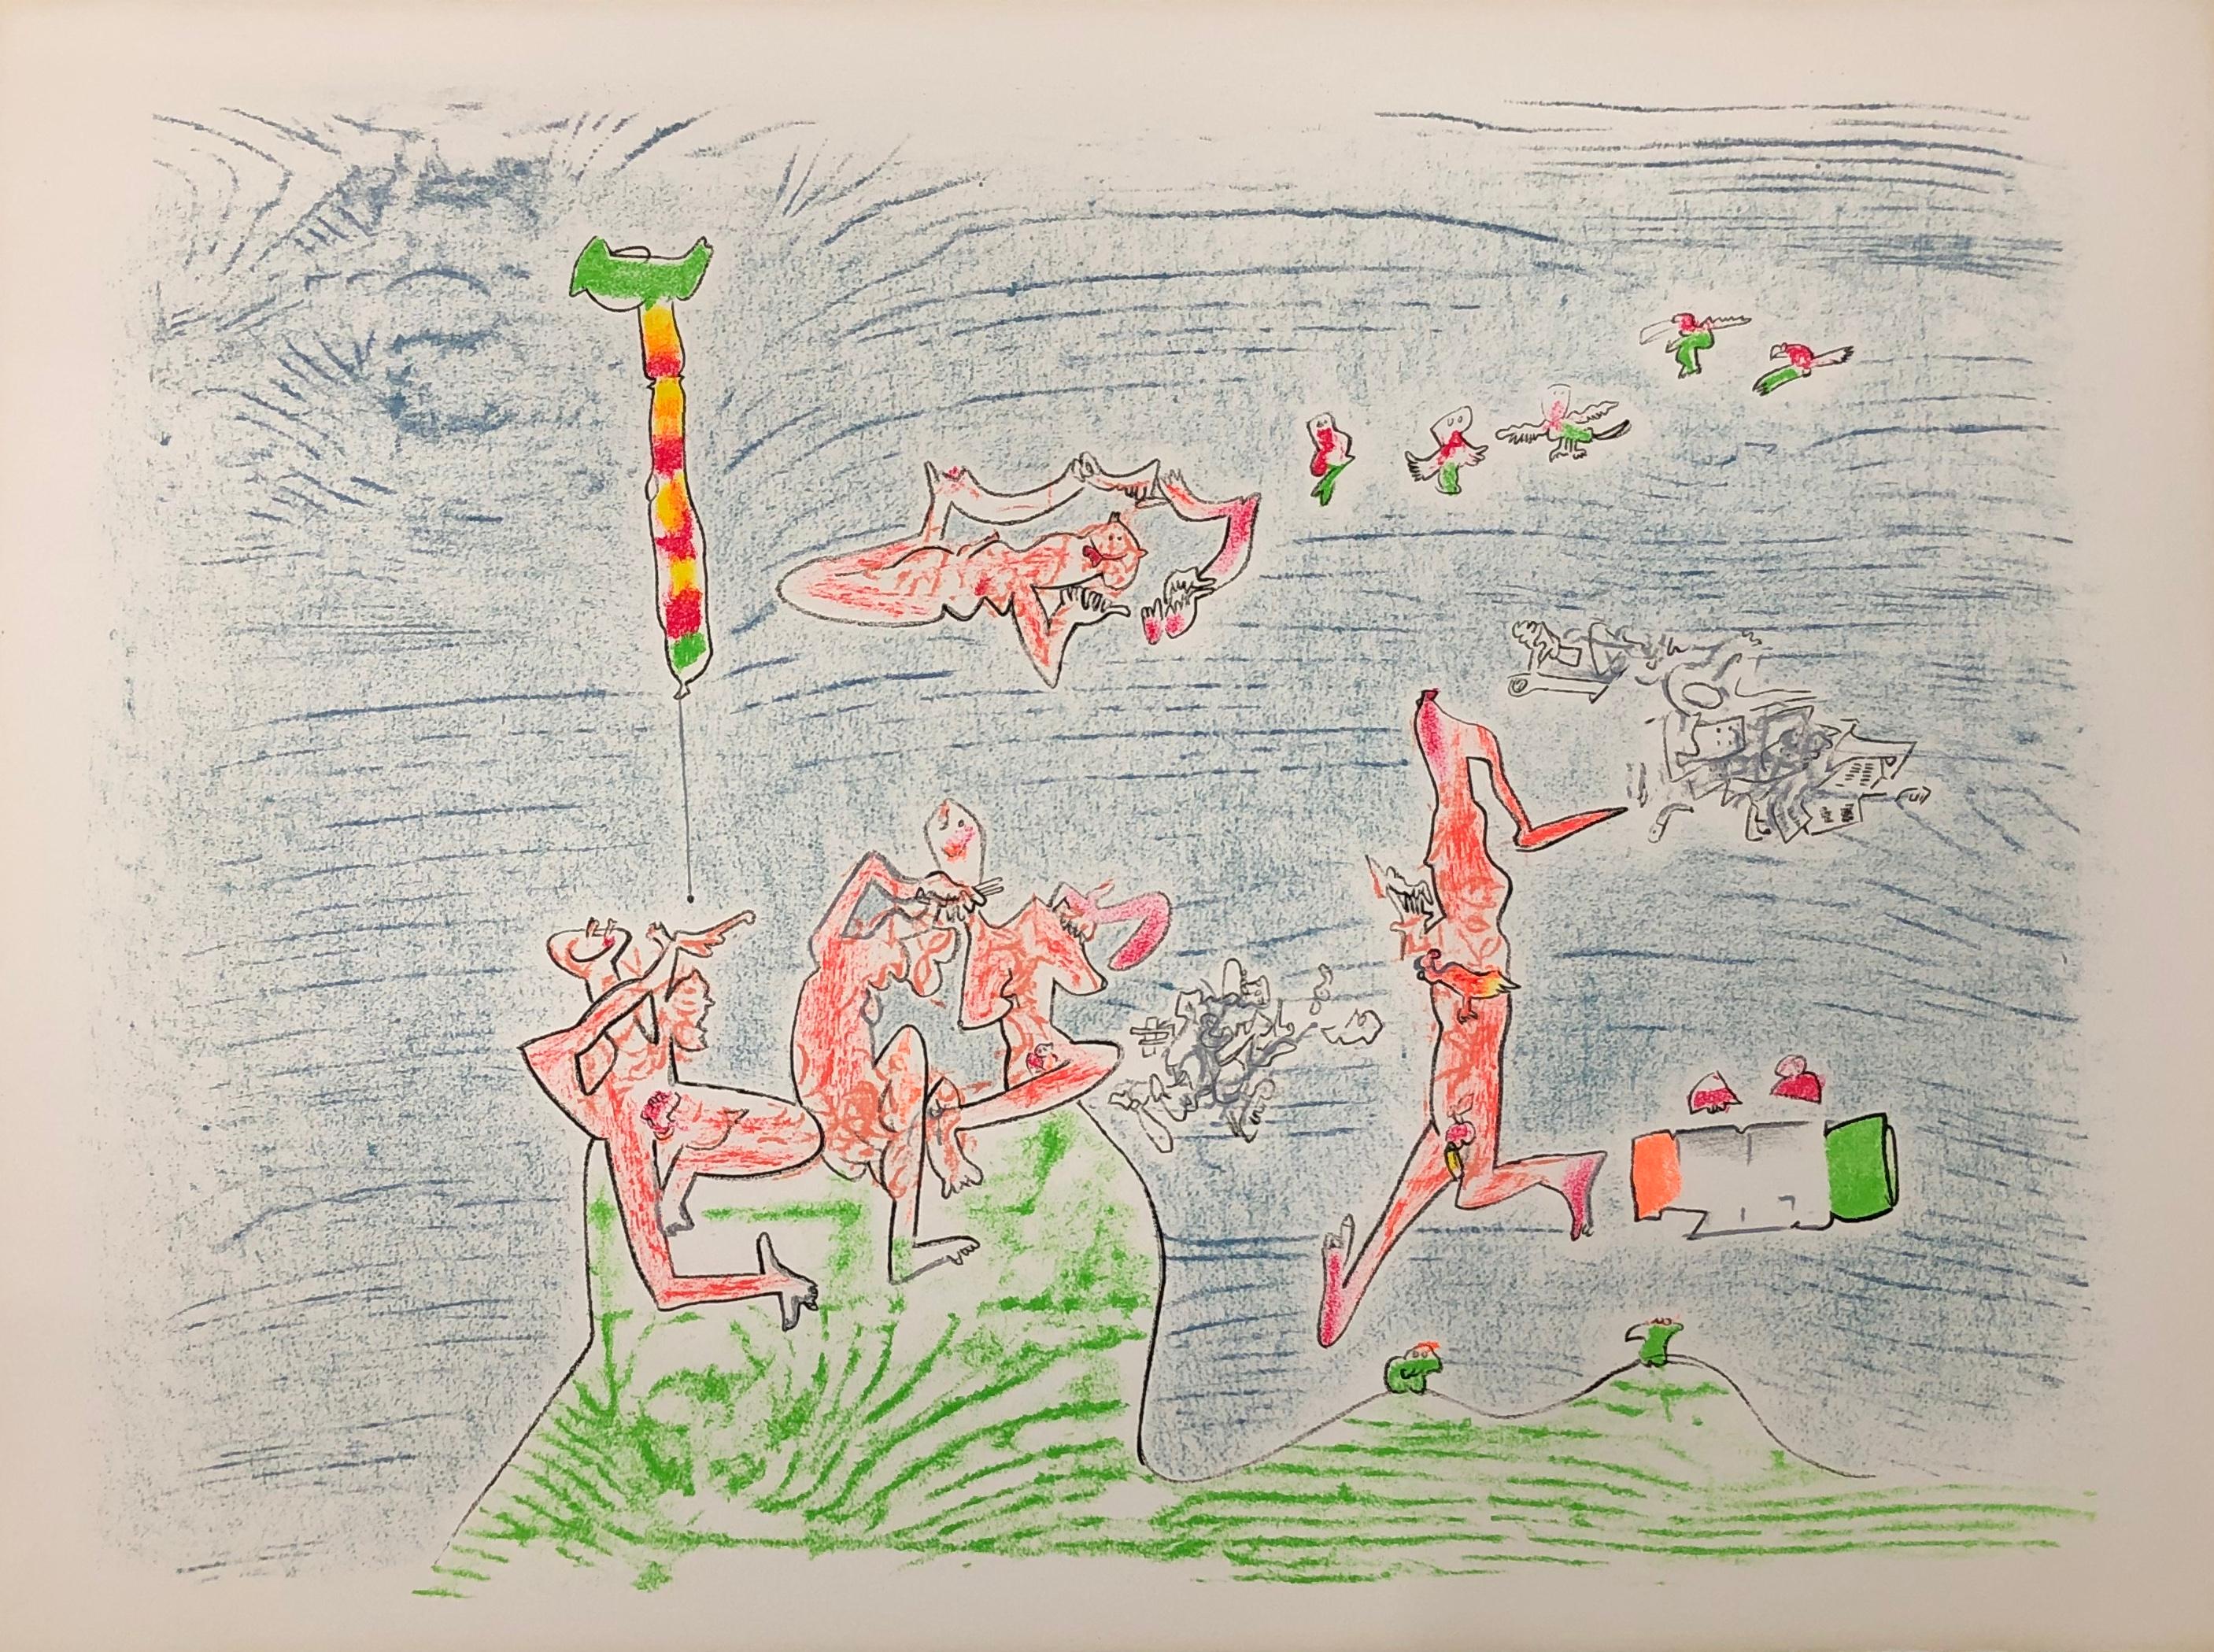 This colorful color lithograph by Roberto Matta was printed at the Atelier Mourlot in Paris in 1976 and comes from an edition of 100 - from the series "Ca Ira" (it'll be fine) Ref. Ferrari – Catalogue raisonné.

Certificate of Provenance: 
Each